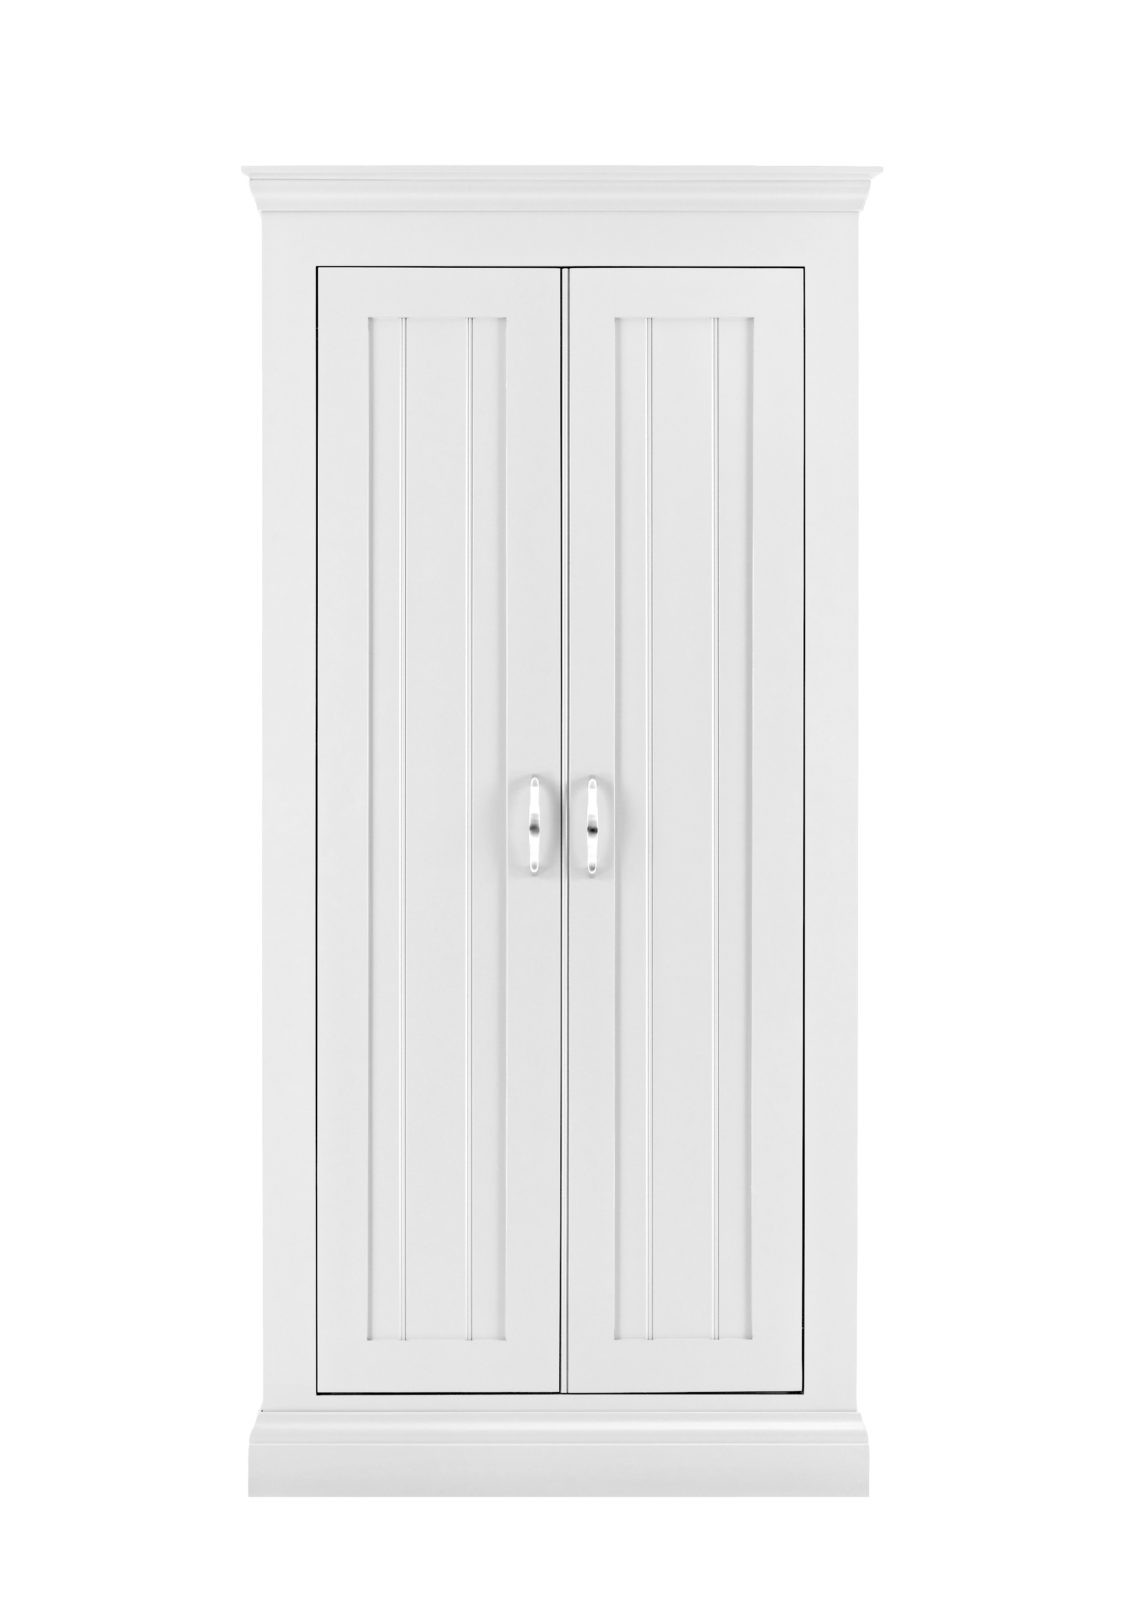 Lusso Customisable All Hanging Wardrobe 0.9m Con-Tempo Furniture 16